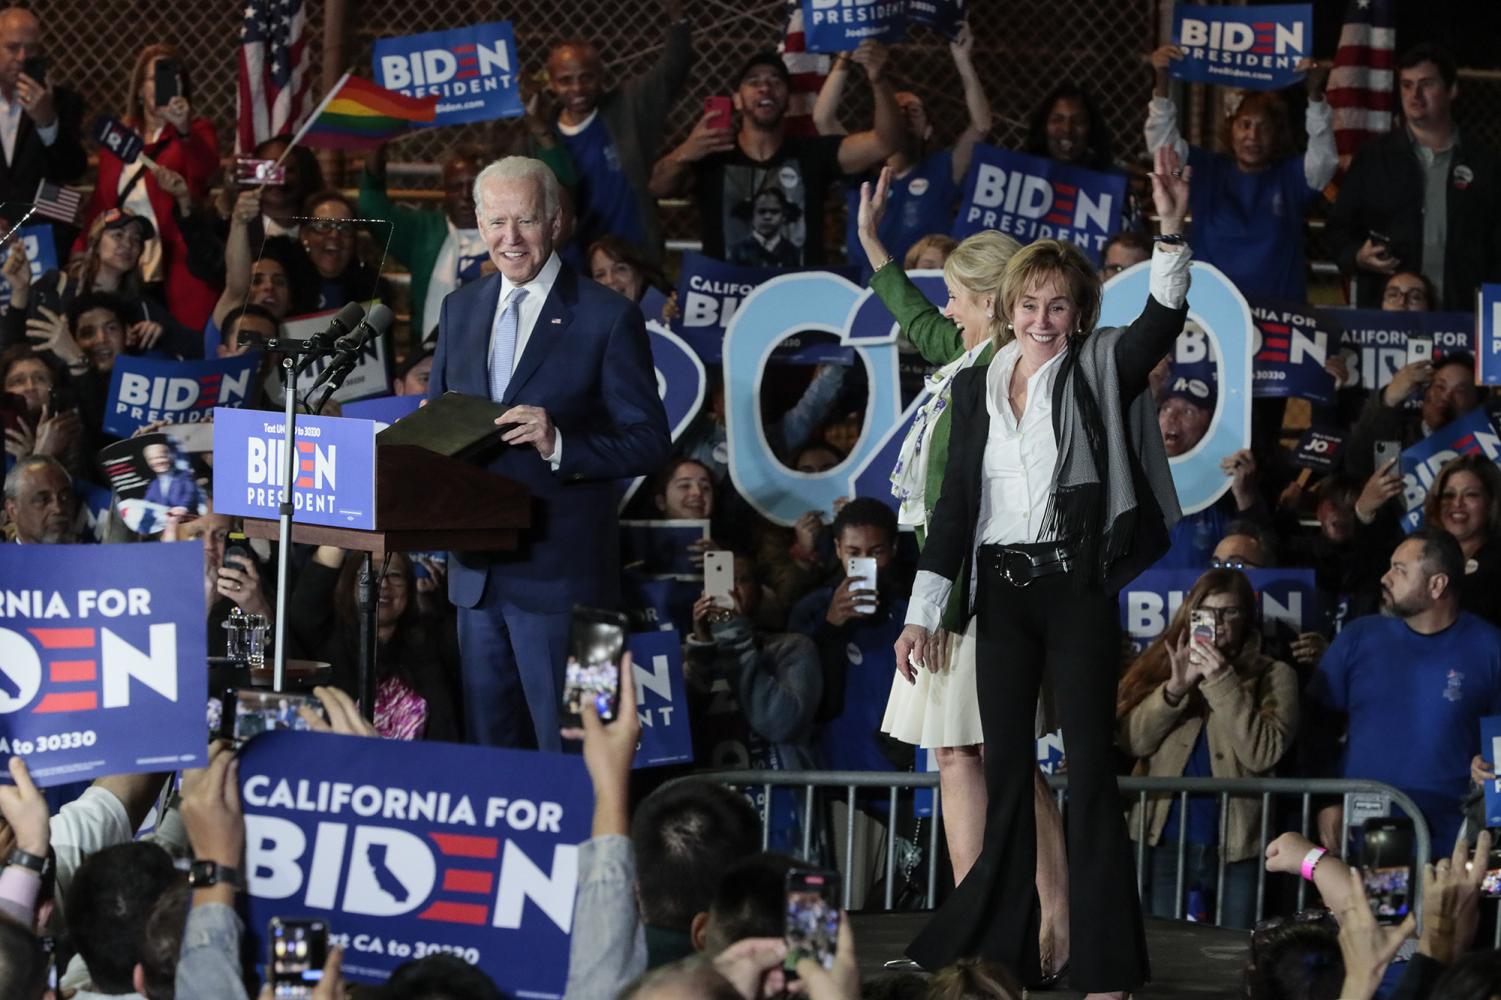 Democratic+Presidential+hopeful+Joe+Biden+takes+the+stage+with+his+wife%2C+Jill%2C+and+sister%2C+Valerie%2C+right%2C+during+a+campaign+rally+at+the+Baldwin+Hills+Recreation+Center+in+Los+Angeles+on+Tuesday%2C+March+3%2C+2020.+Biden+declared+victory+in+the+Illinois+presidential+primary+on+March+17.%0A